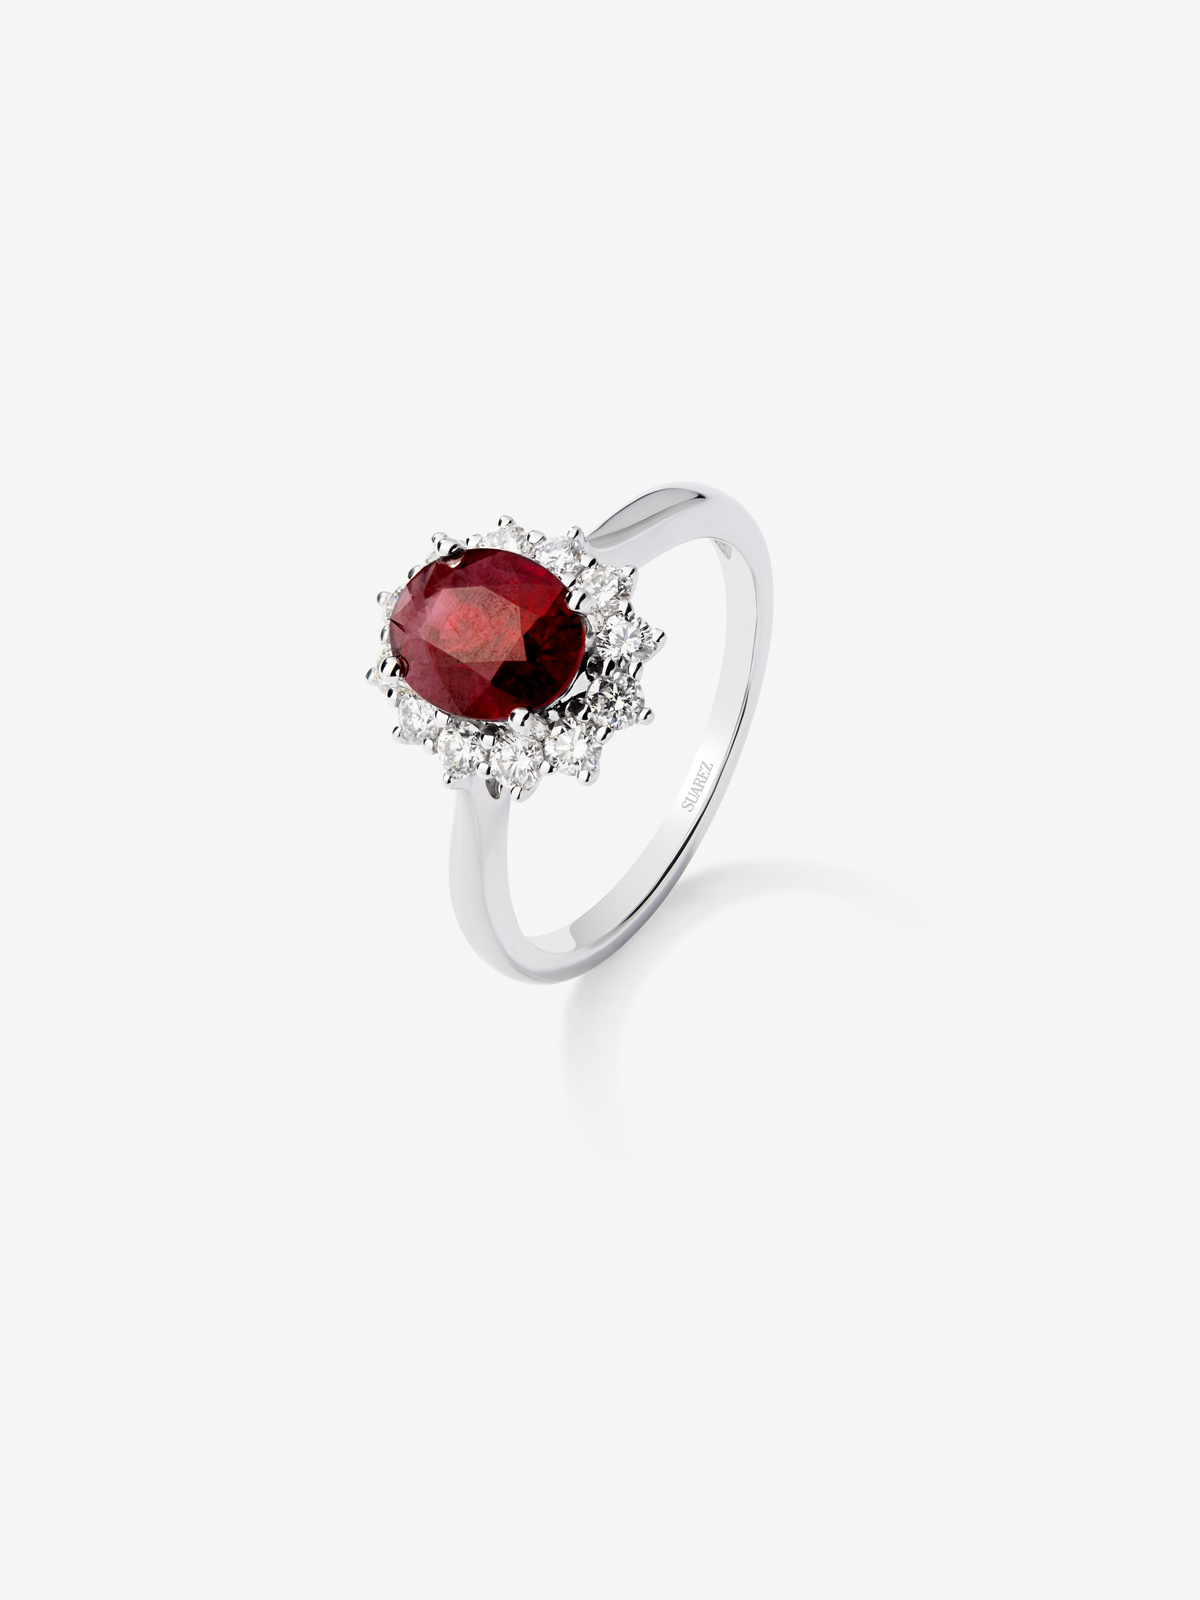 18K White Gold Ring with Red Vivid Ruba in 1.58 cts oval size and white diamonds of 0.34 cts